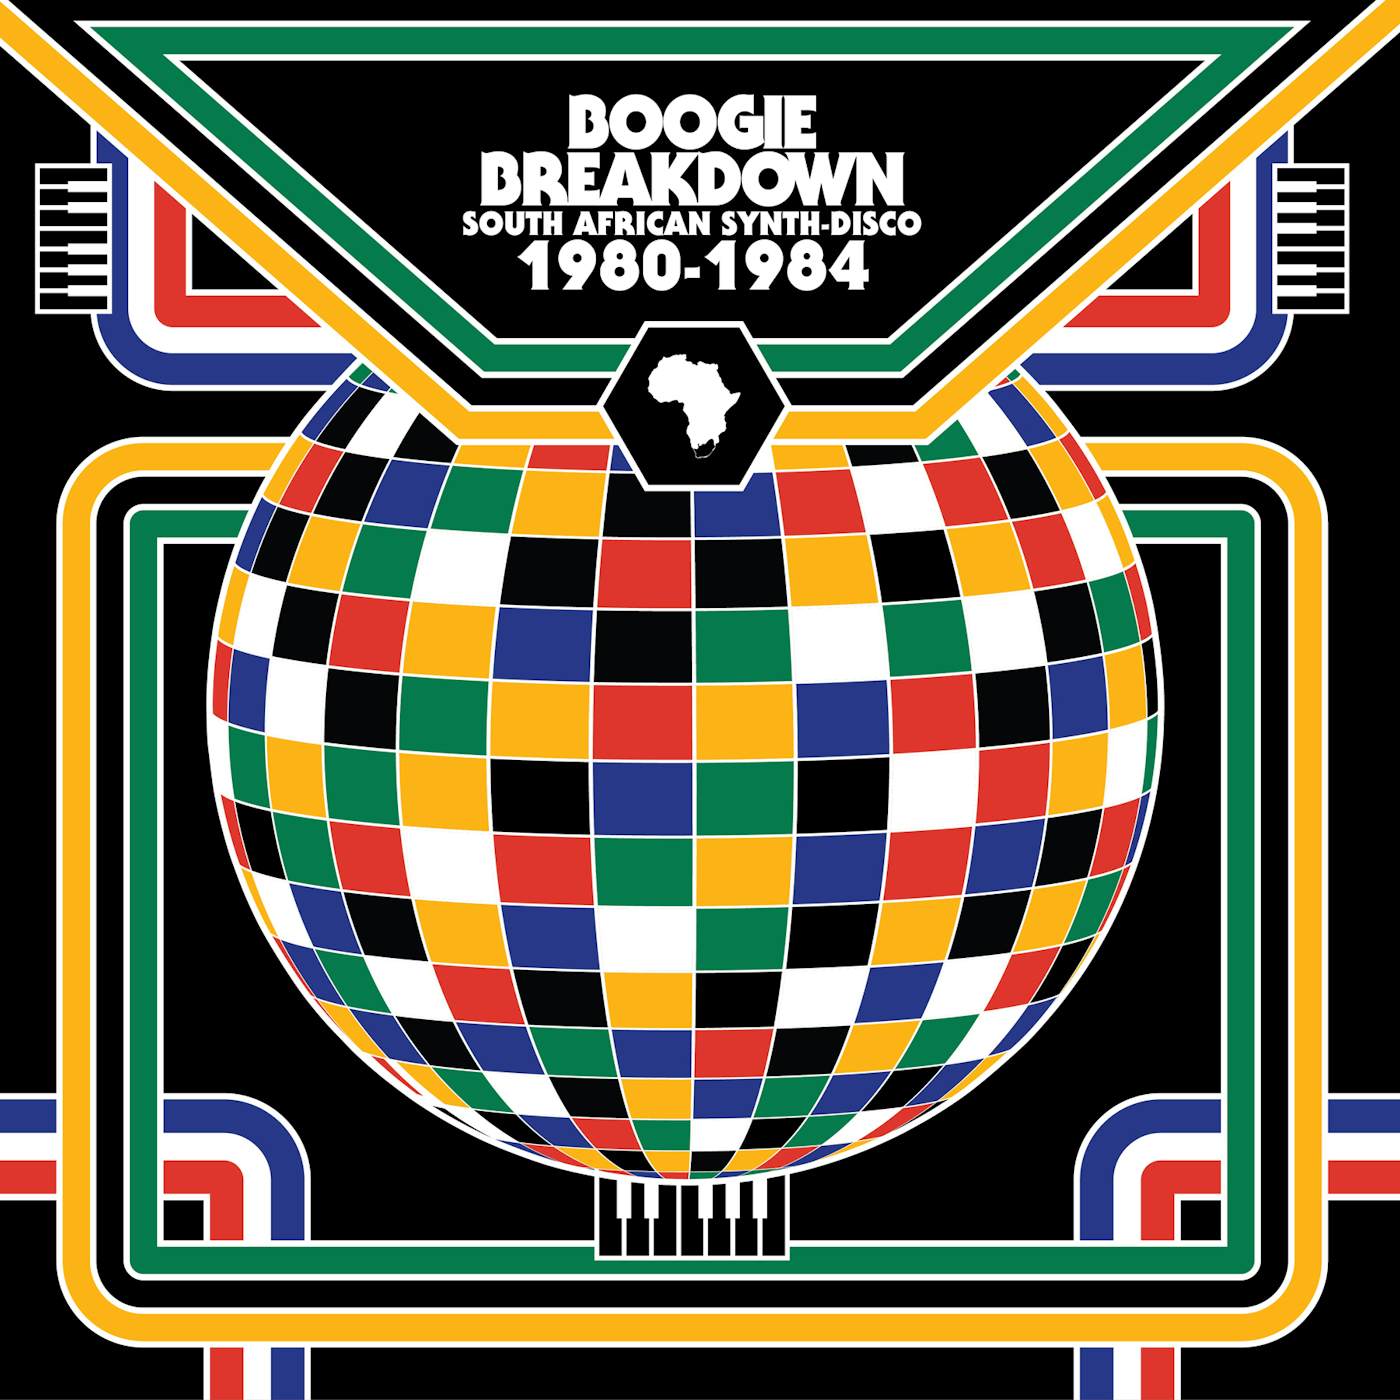 BOOGIE BREAKDOWN: SOUTH AFRICAN SYNTH-DISCO / VAR